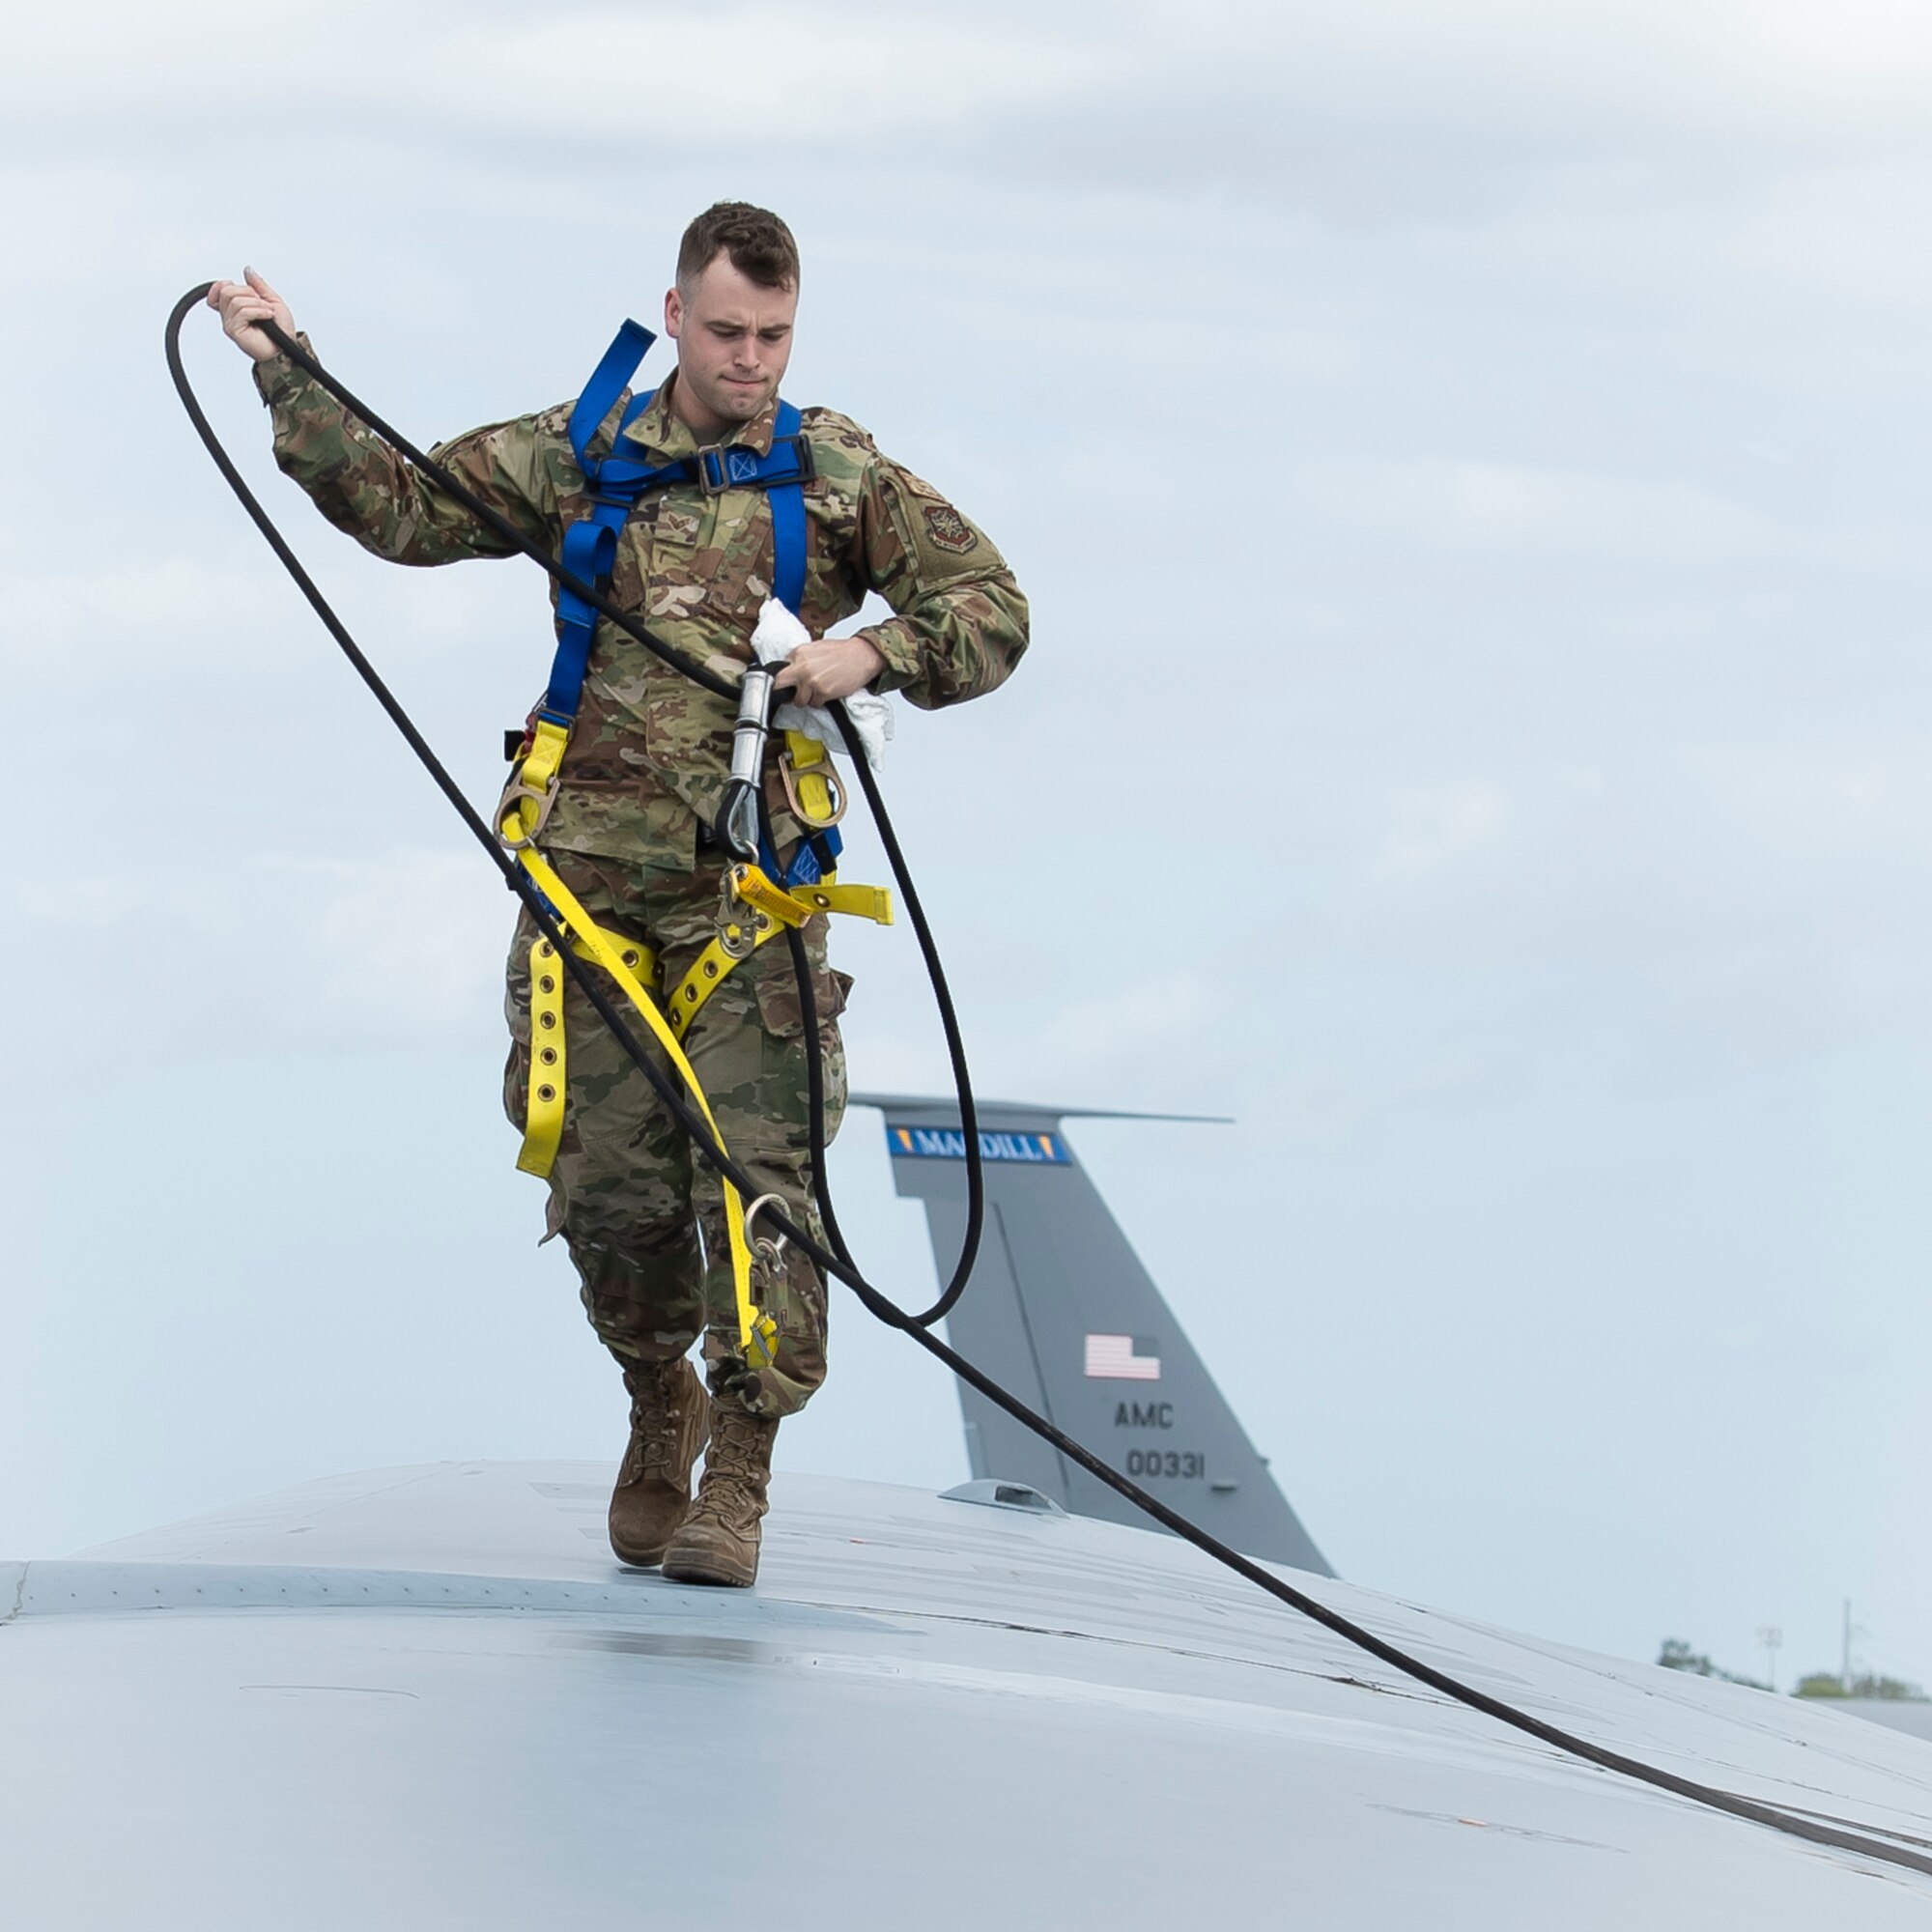 U.S. Air Force Senior Airman Brendon Kozicki, 6th Maintenance Squadron aircraft fuel systems specialist, completes a fuel leak evaluation on the wing of a KC-135 Stratotanker aircraft at MacDill Air Force Base, Florida, Oct. 29, 2021.